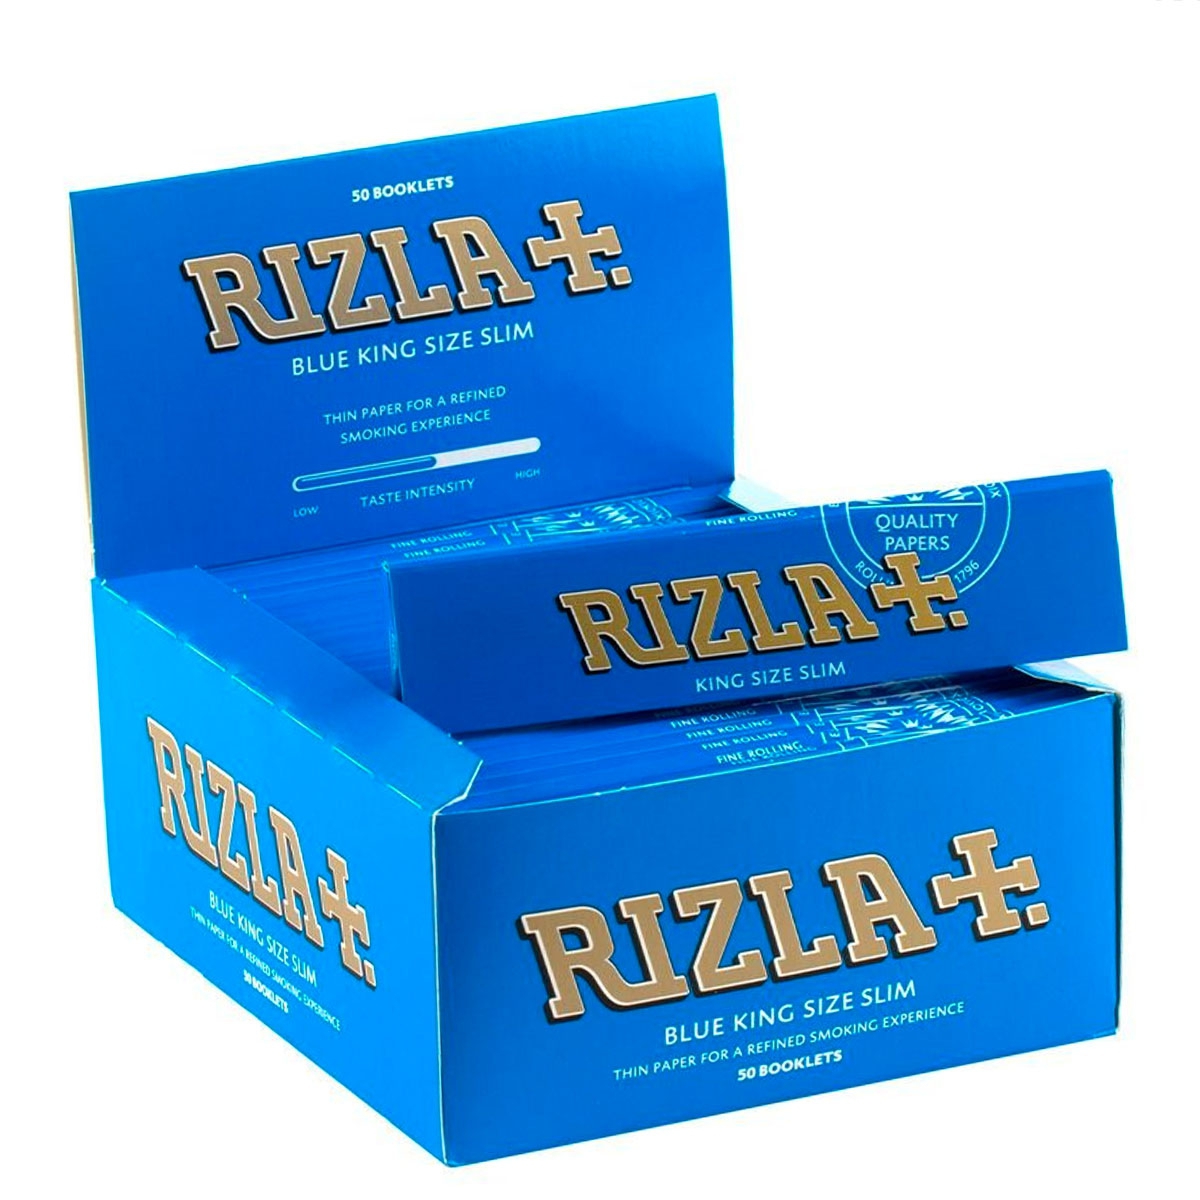 LIQUORICE RED & BLUE REGULAR ROLLING PAPERS 12 BOOKLETS RIZLA GREEN SILVER